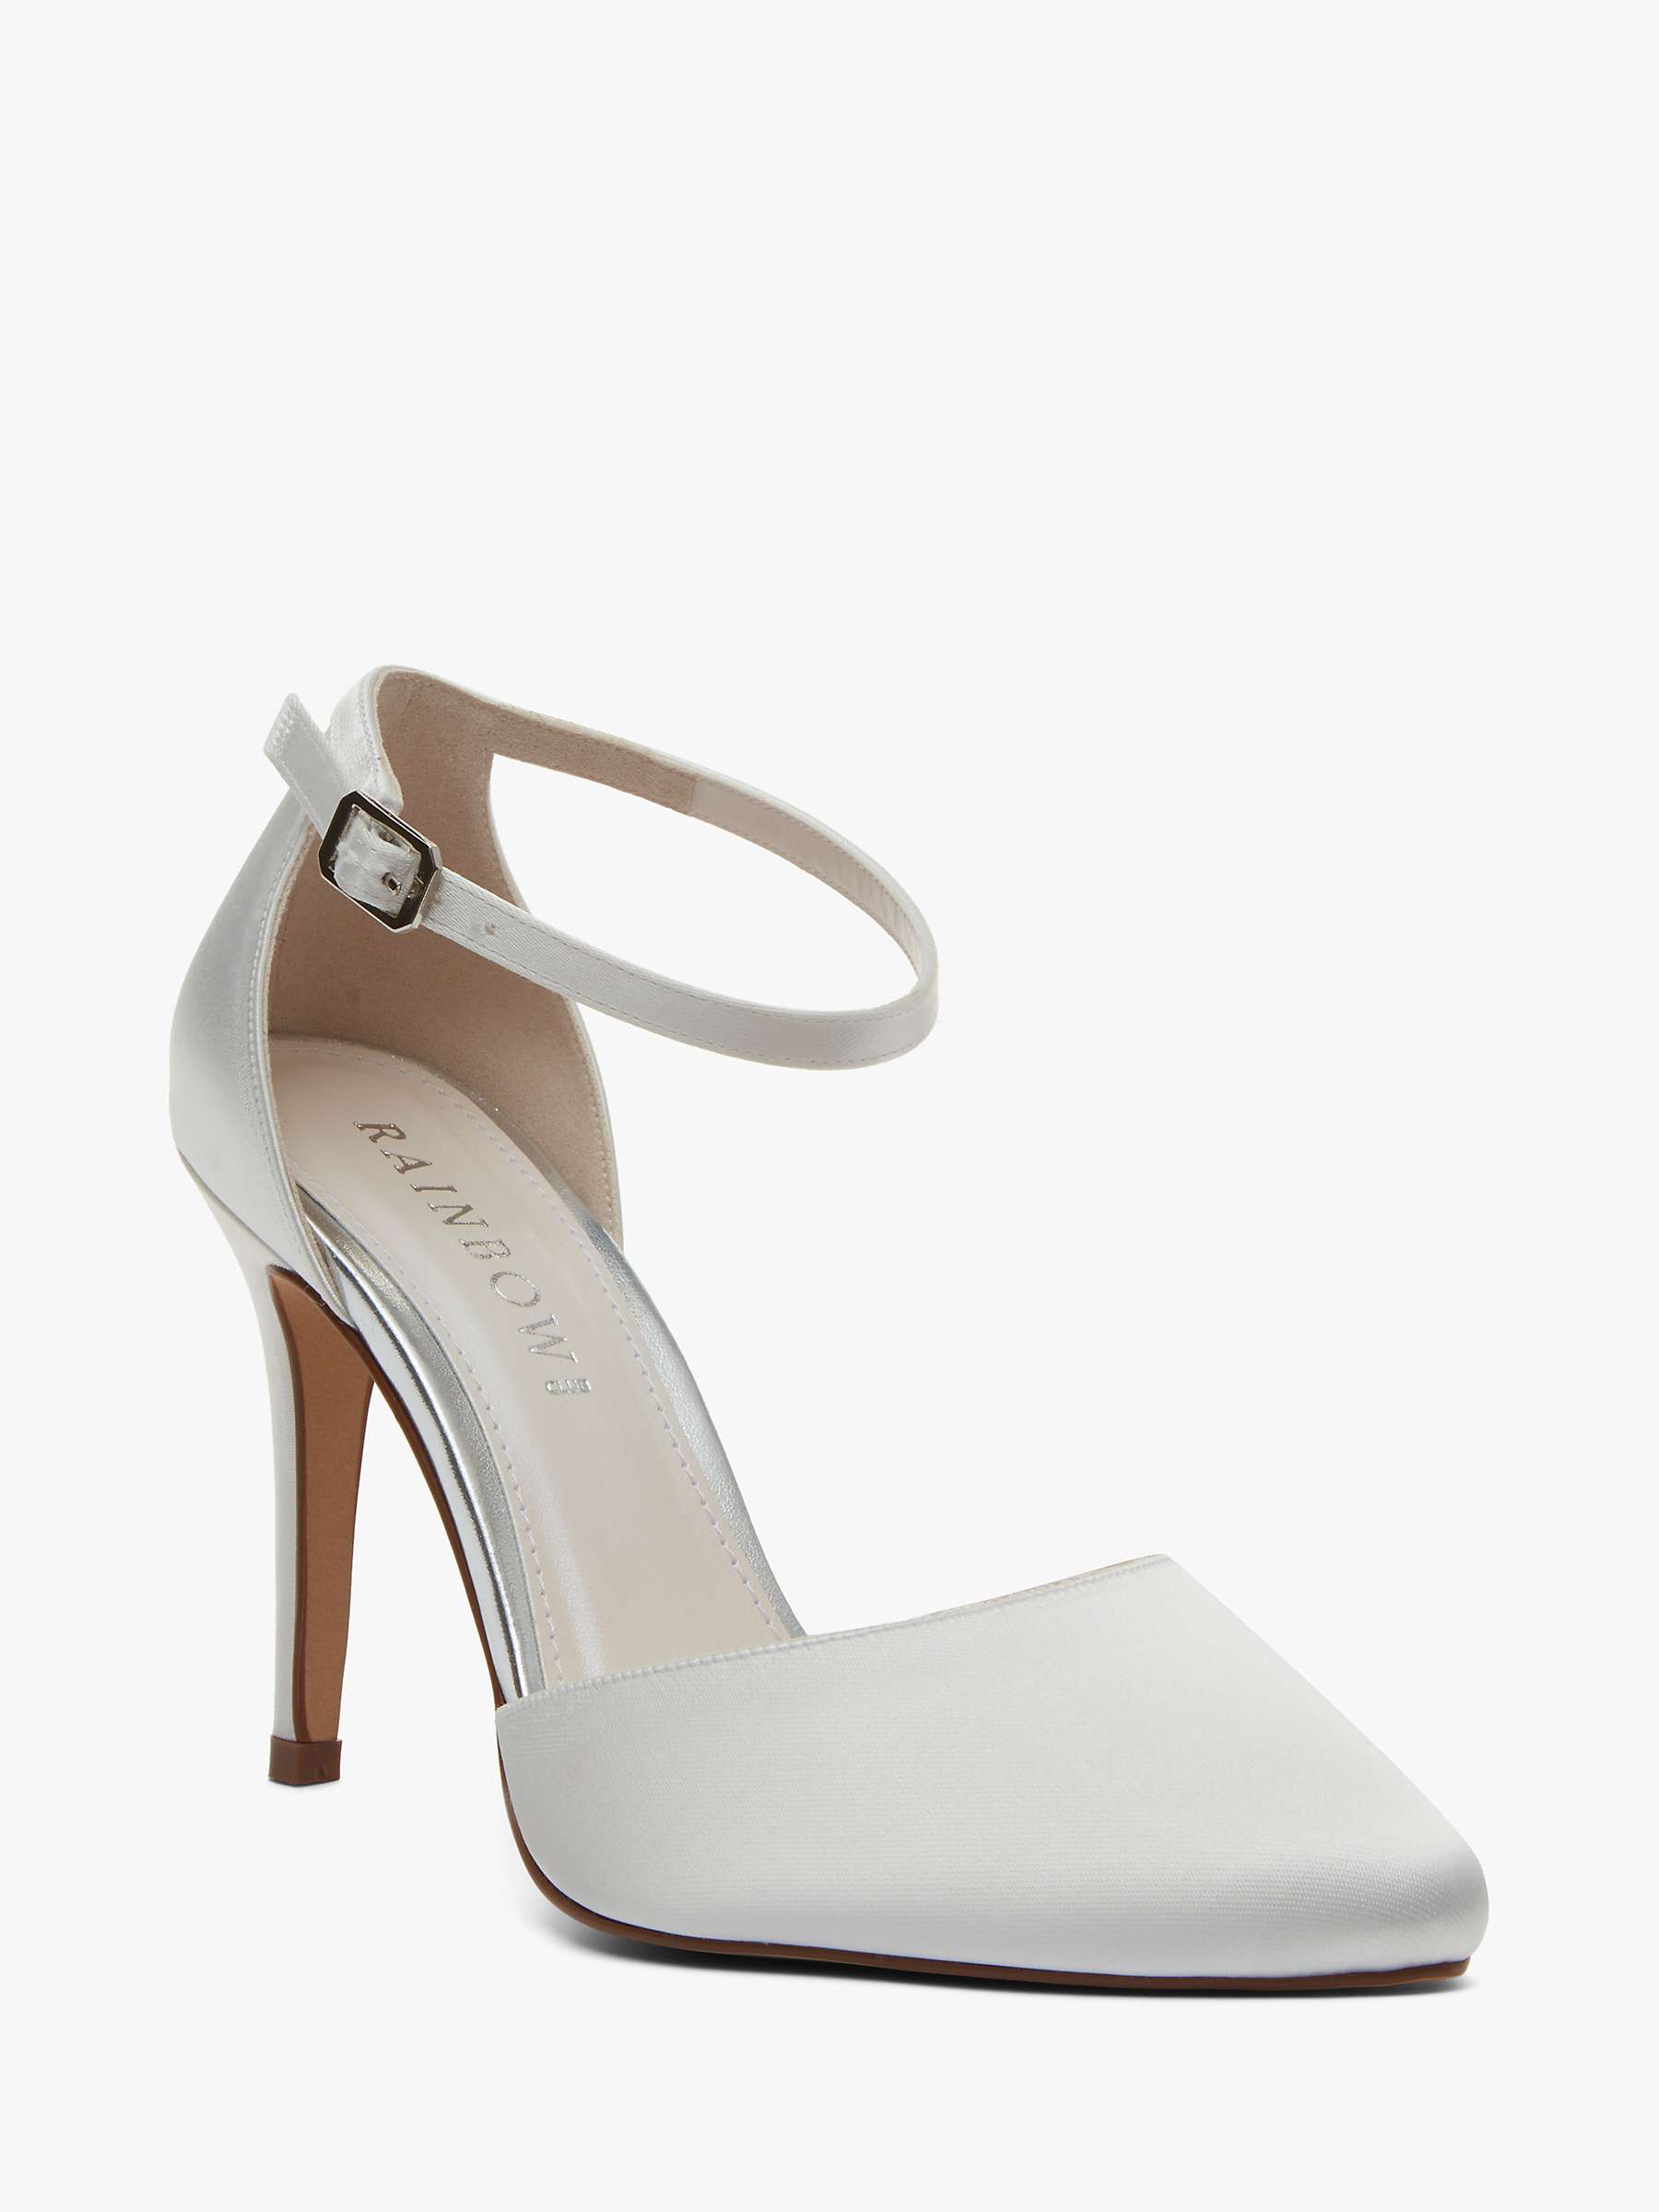 Buy Rainbow Club Carly Court Shoes, Ivory Online at johnlewis.com